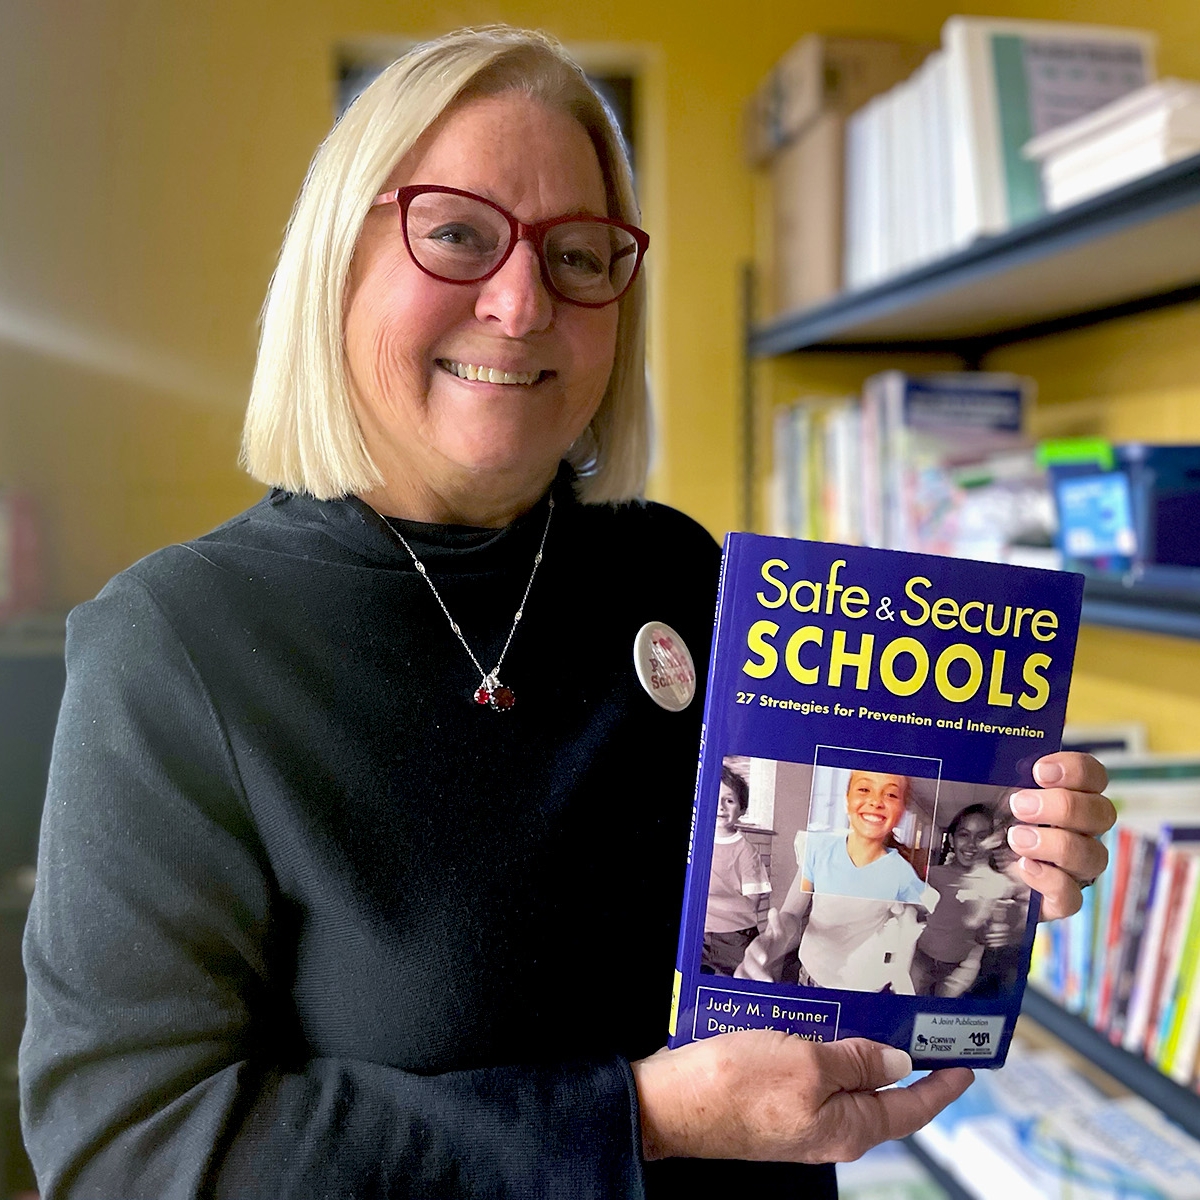 A woman holds a book titled "Safe & Secure Schools"